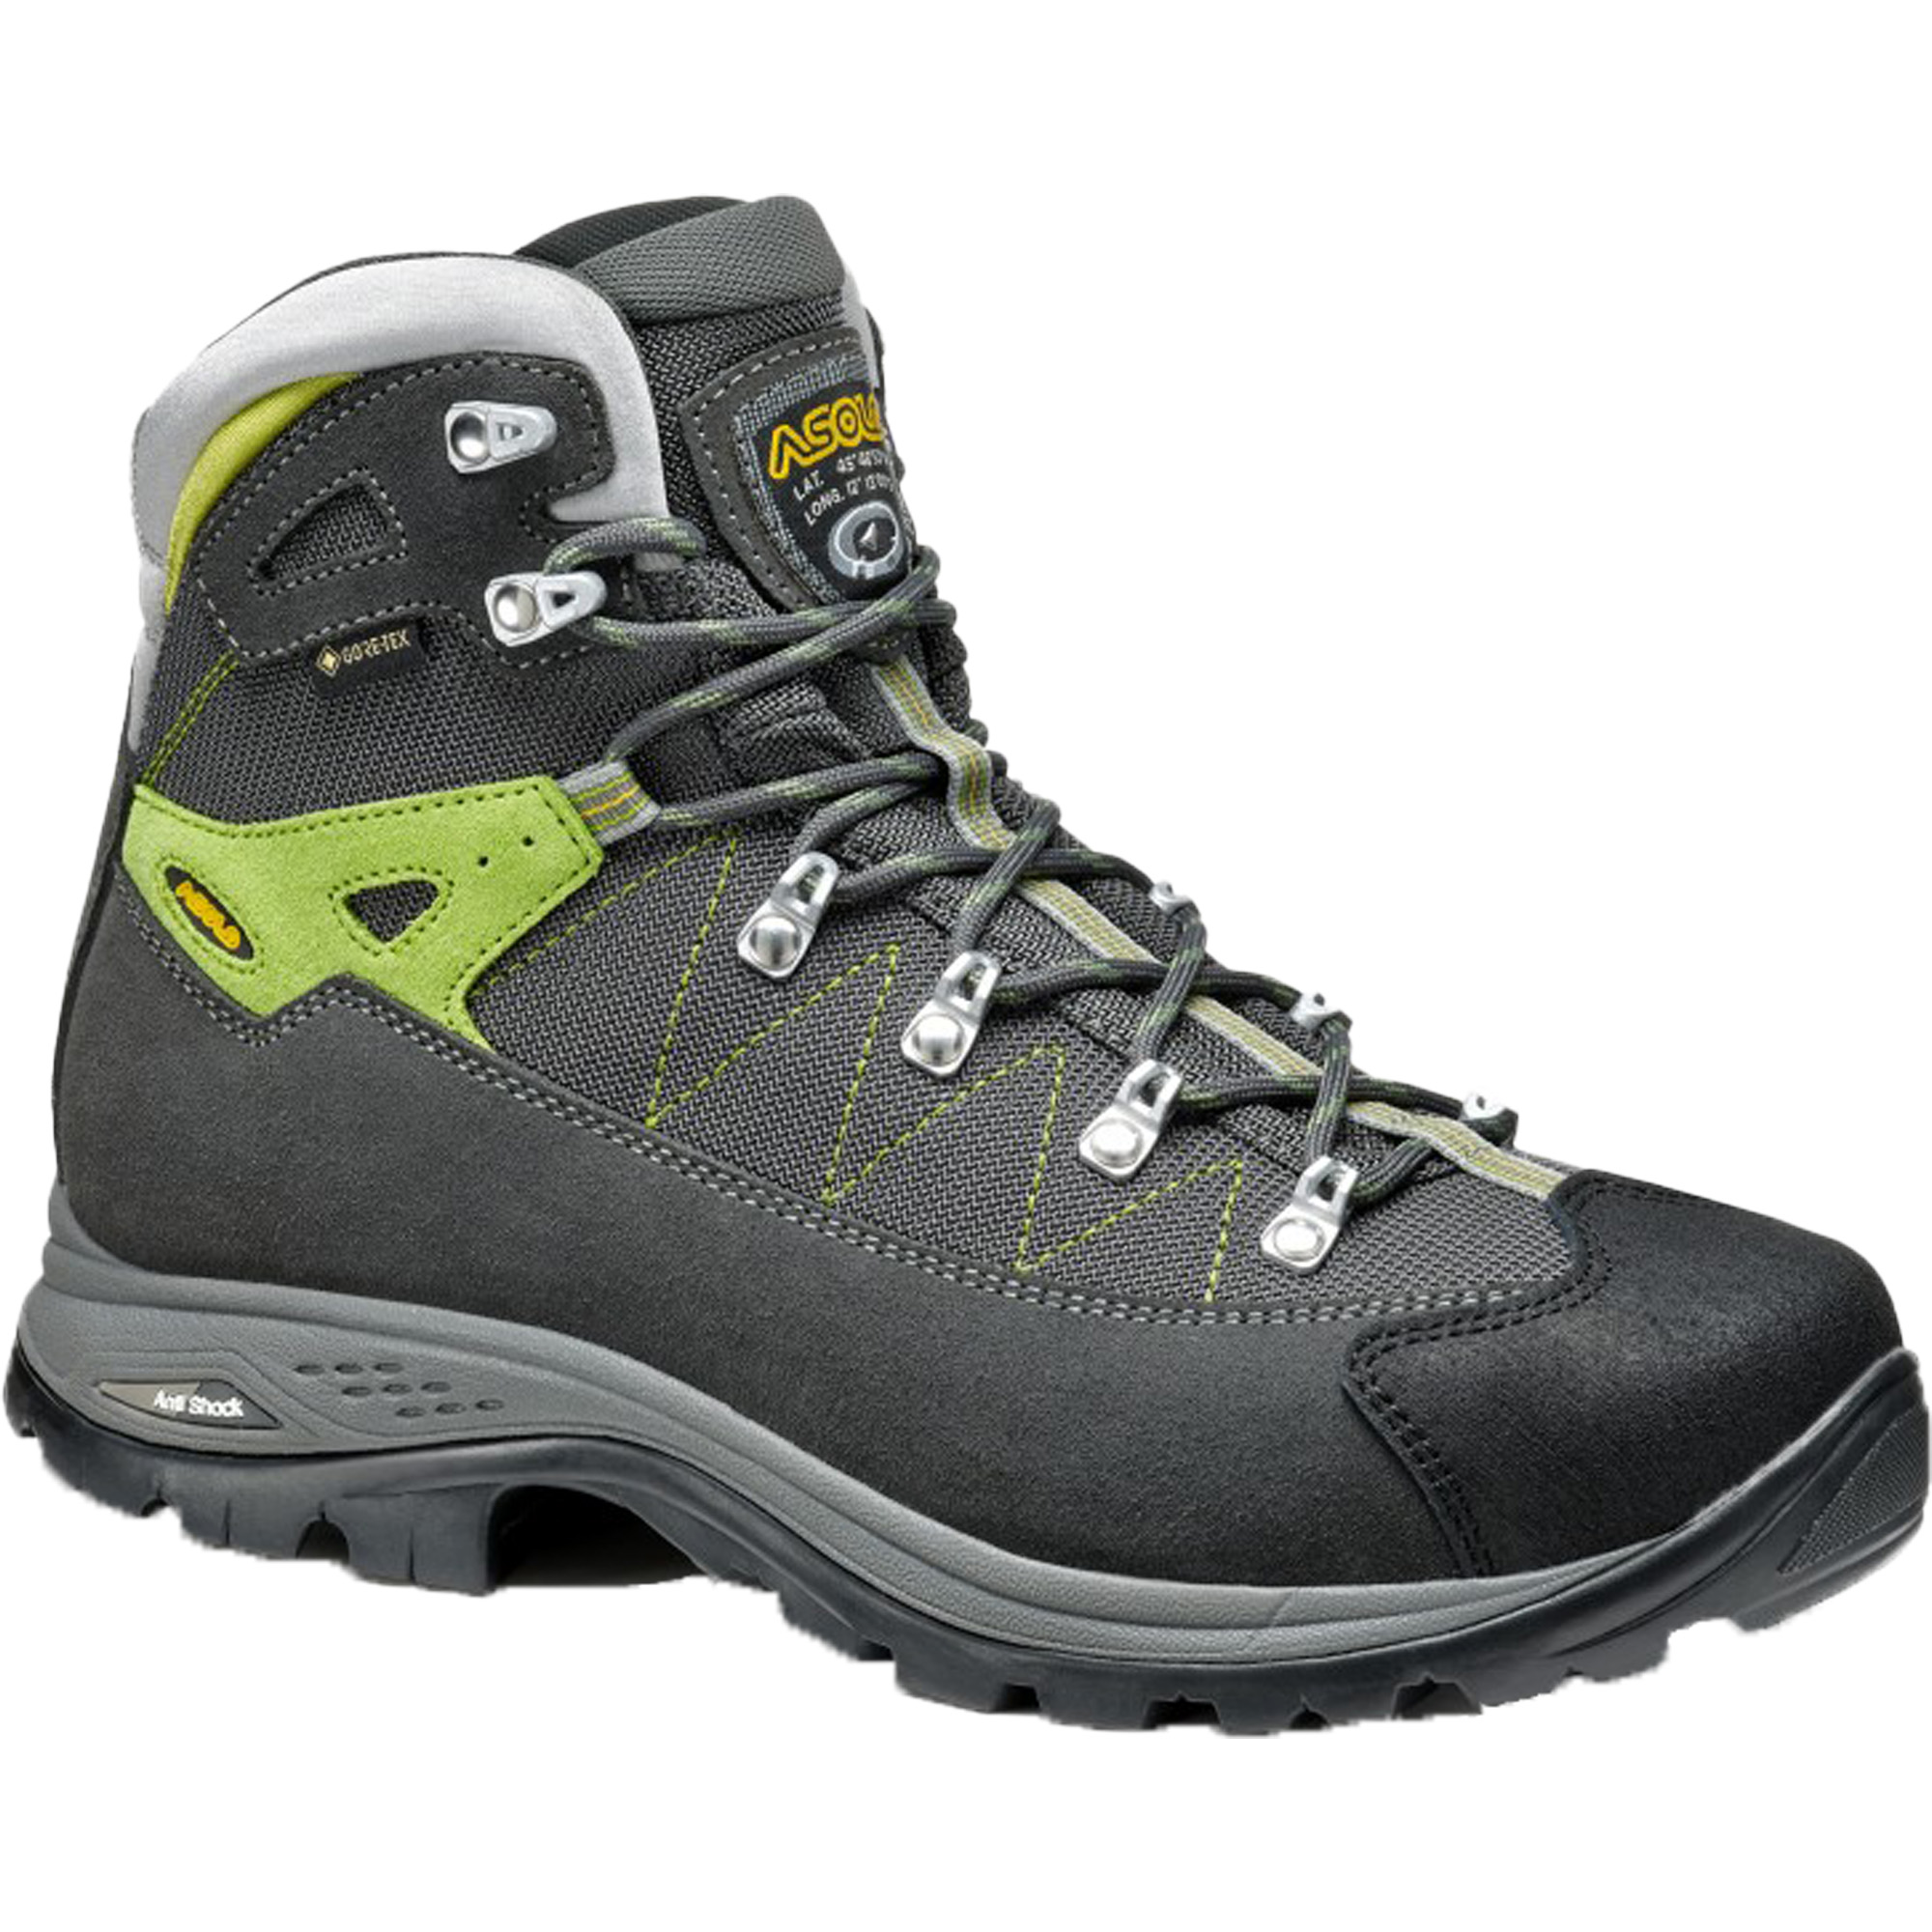 Asolo Finder GV Gore-Tex Hiking Boots, UK 8 Graphite/Green Lime